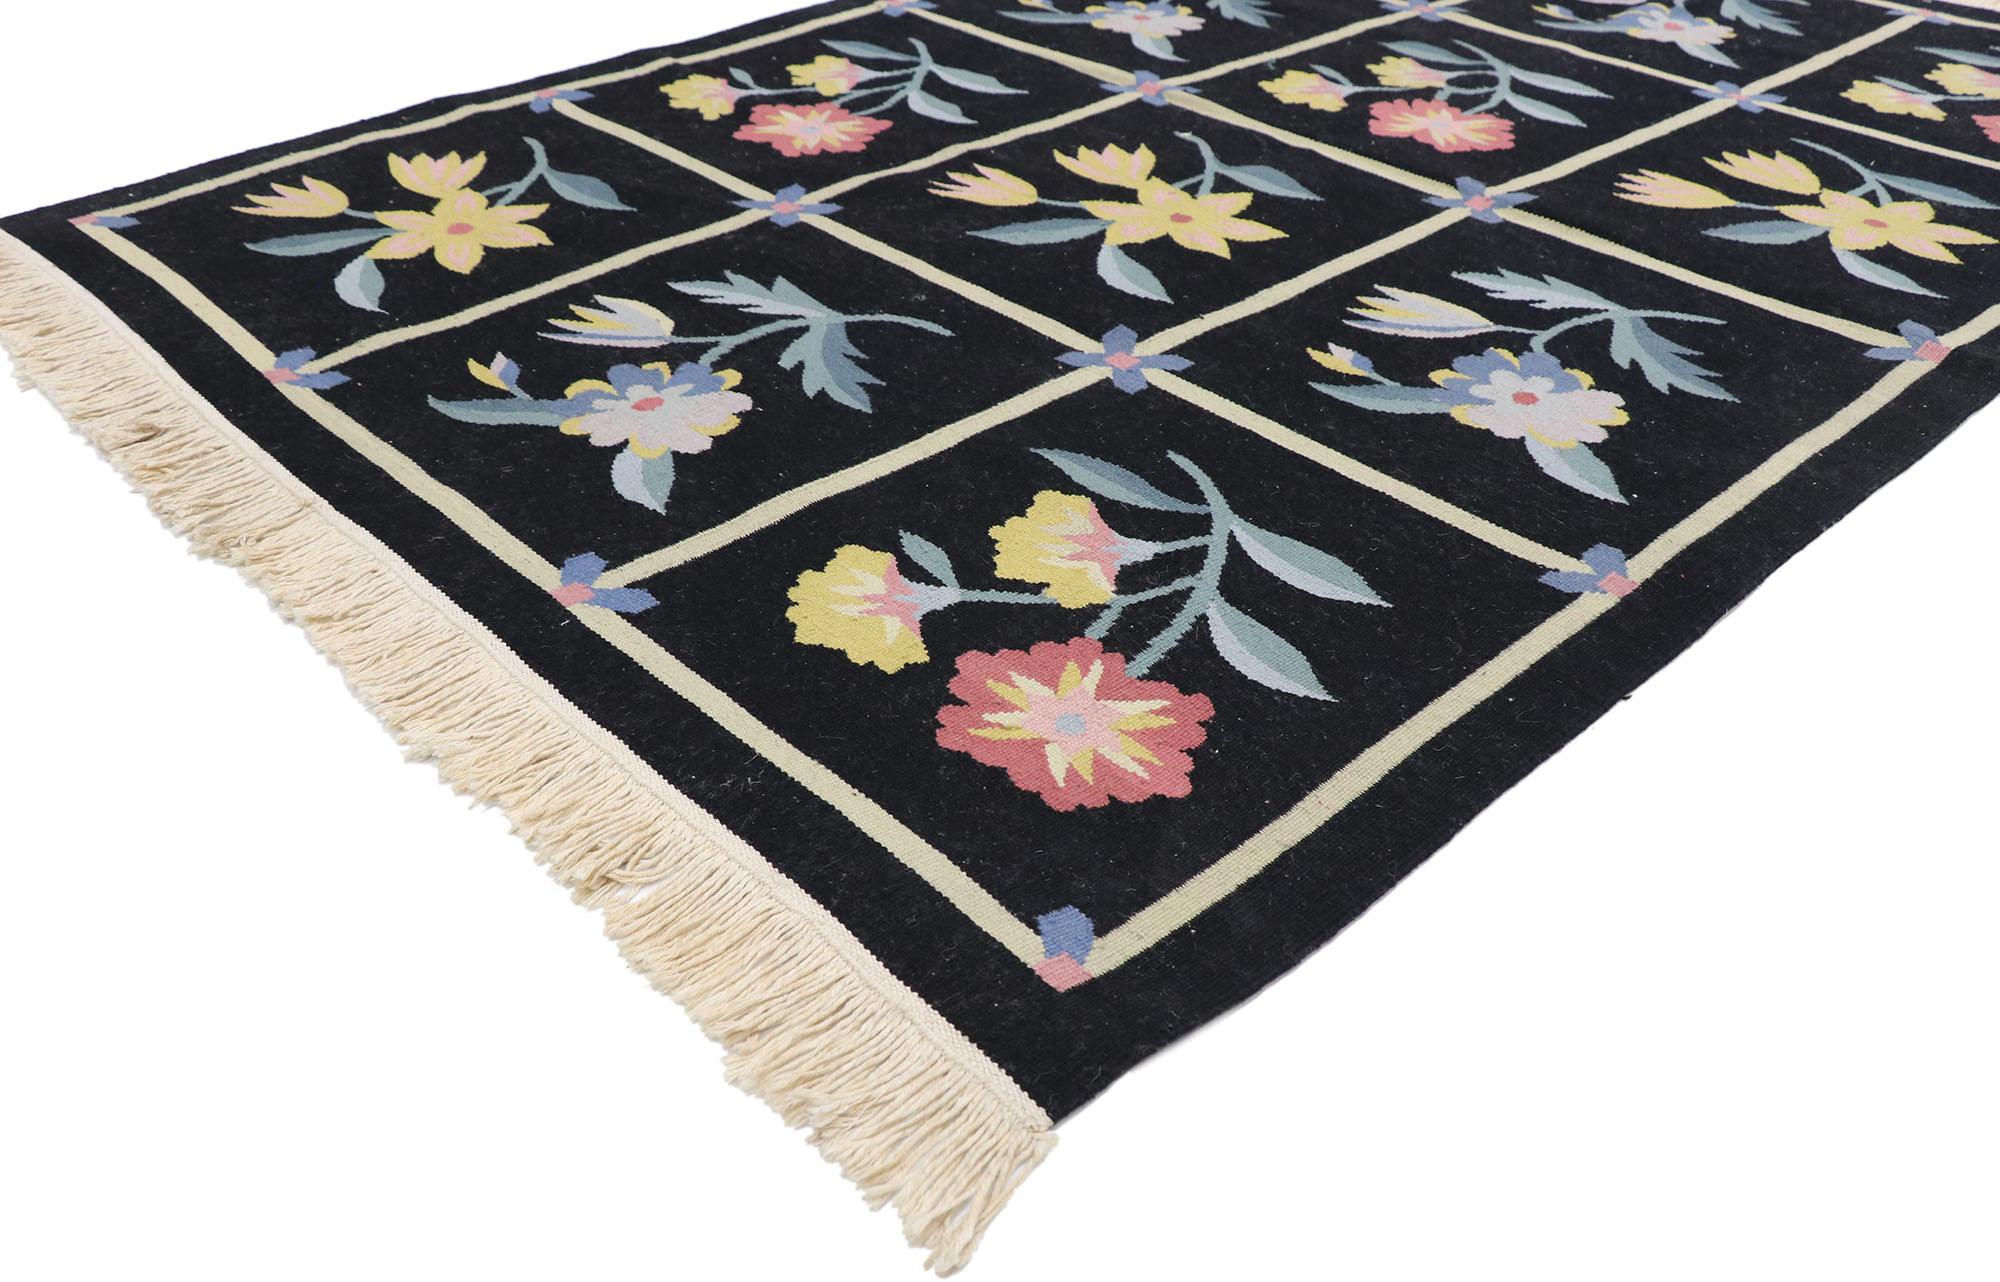 78022 vintage Chinese Floral Kilim rug with English Country Cottage style 04'01 x 06'02. Cleverly composed and distinctively well-balanced, this hand-woven wool vintage Chinse floral kilim rug will take on a curated lived-in look that feels timeless